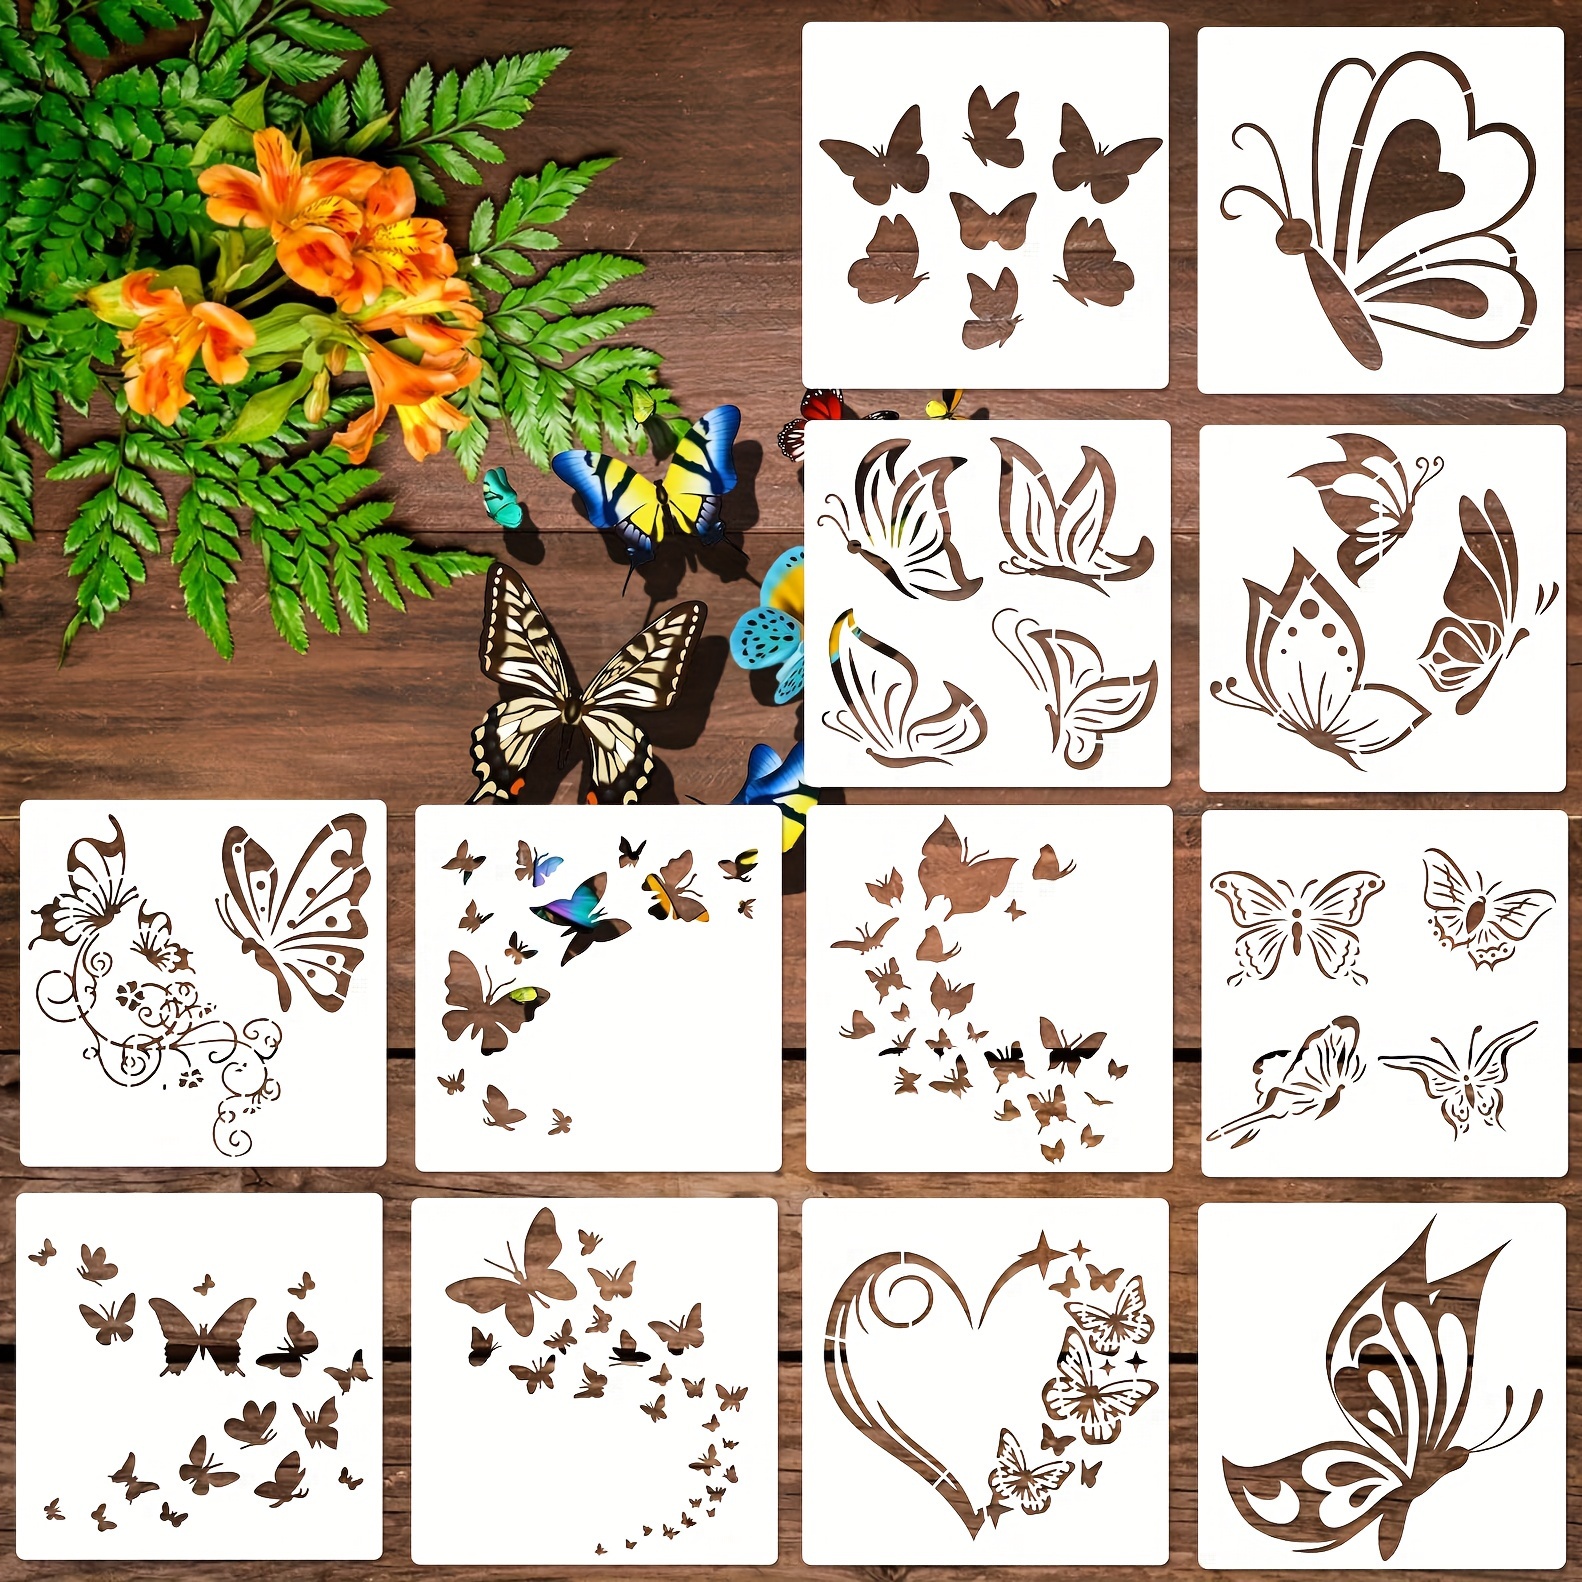 

12pcs Butterfly Stencil Reusable Flying Butterfly Template, Plastic Nature Spring Stencils Walls Canvas Fabric Stencil Art Projects Graffiti Stencils For Painting On Wood Drawing Home Decor Wood